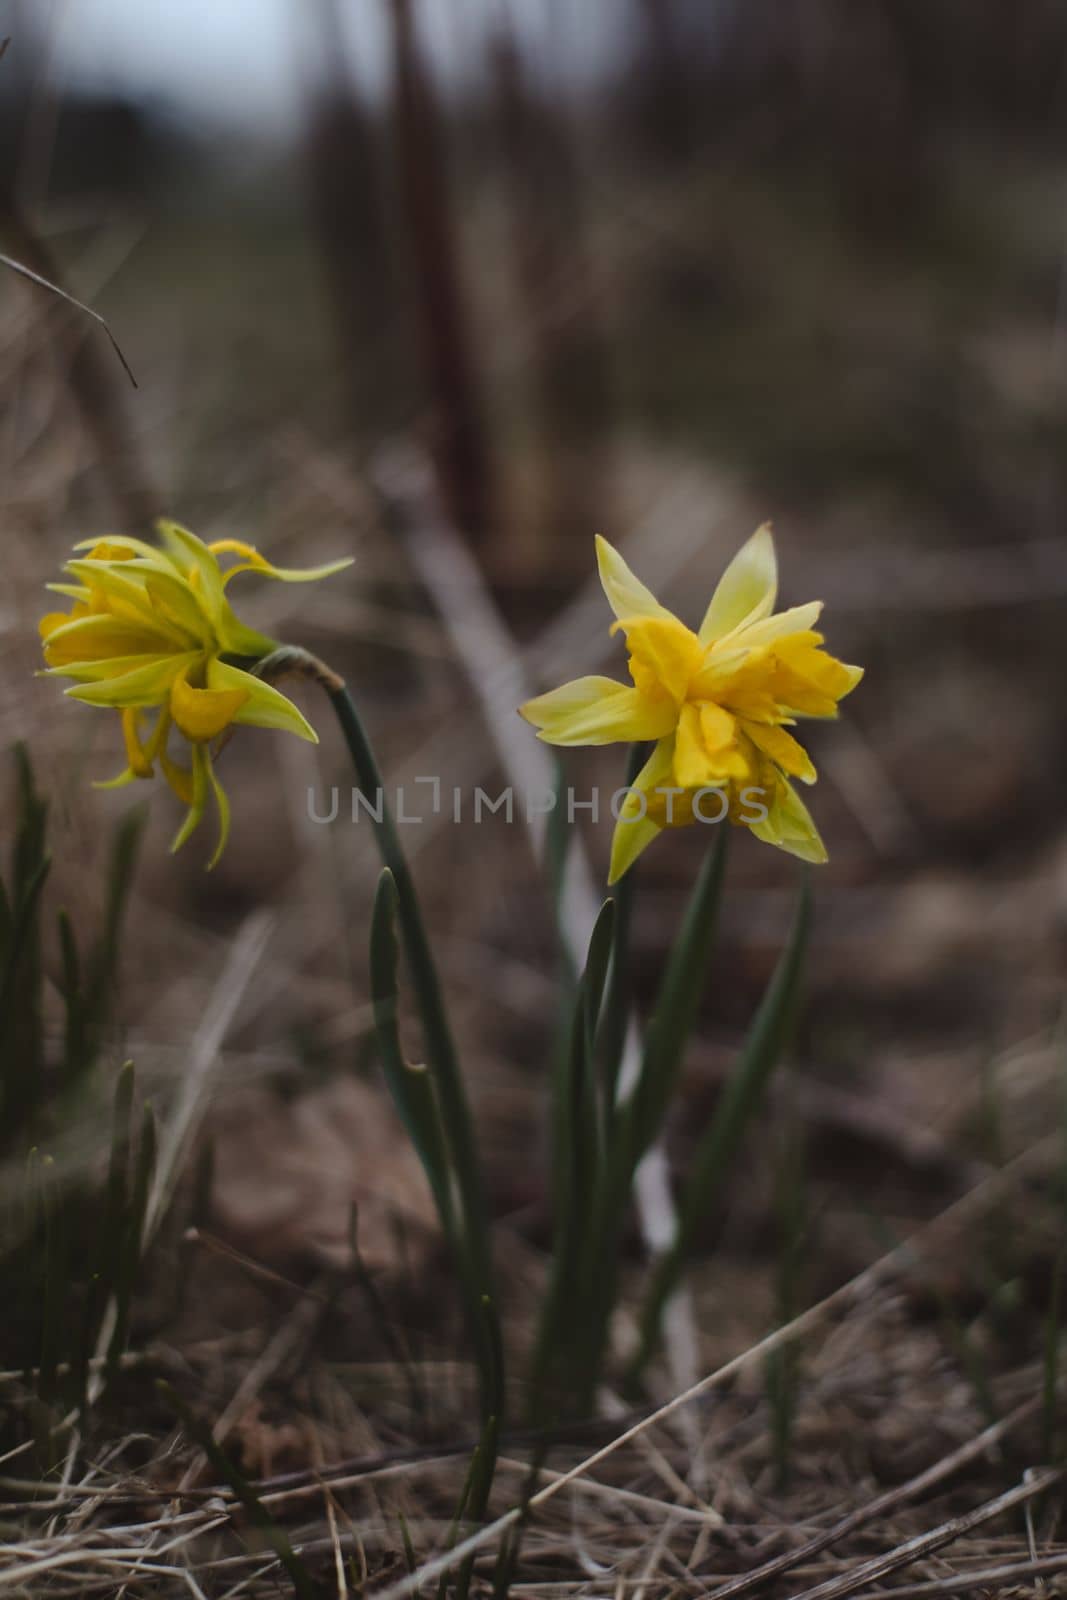 Yellow daffodil flowers in early spring.